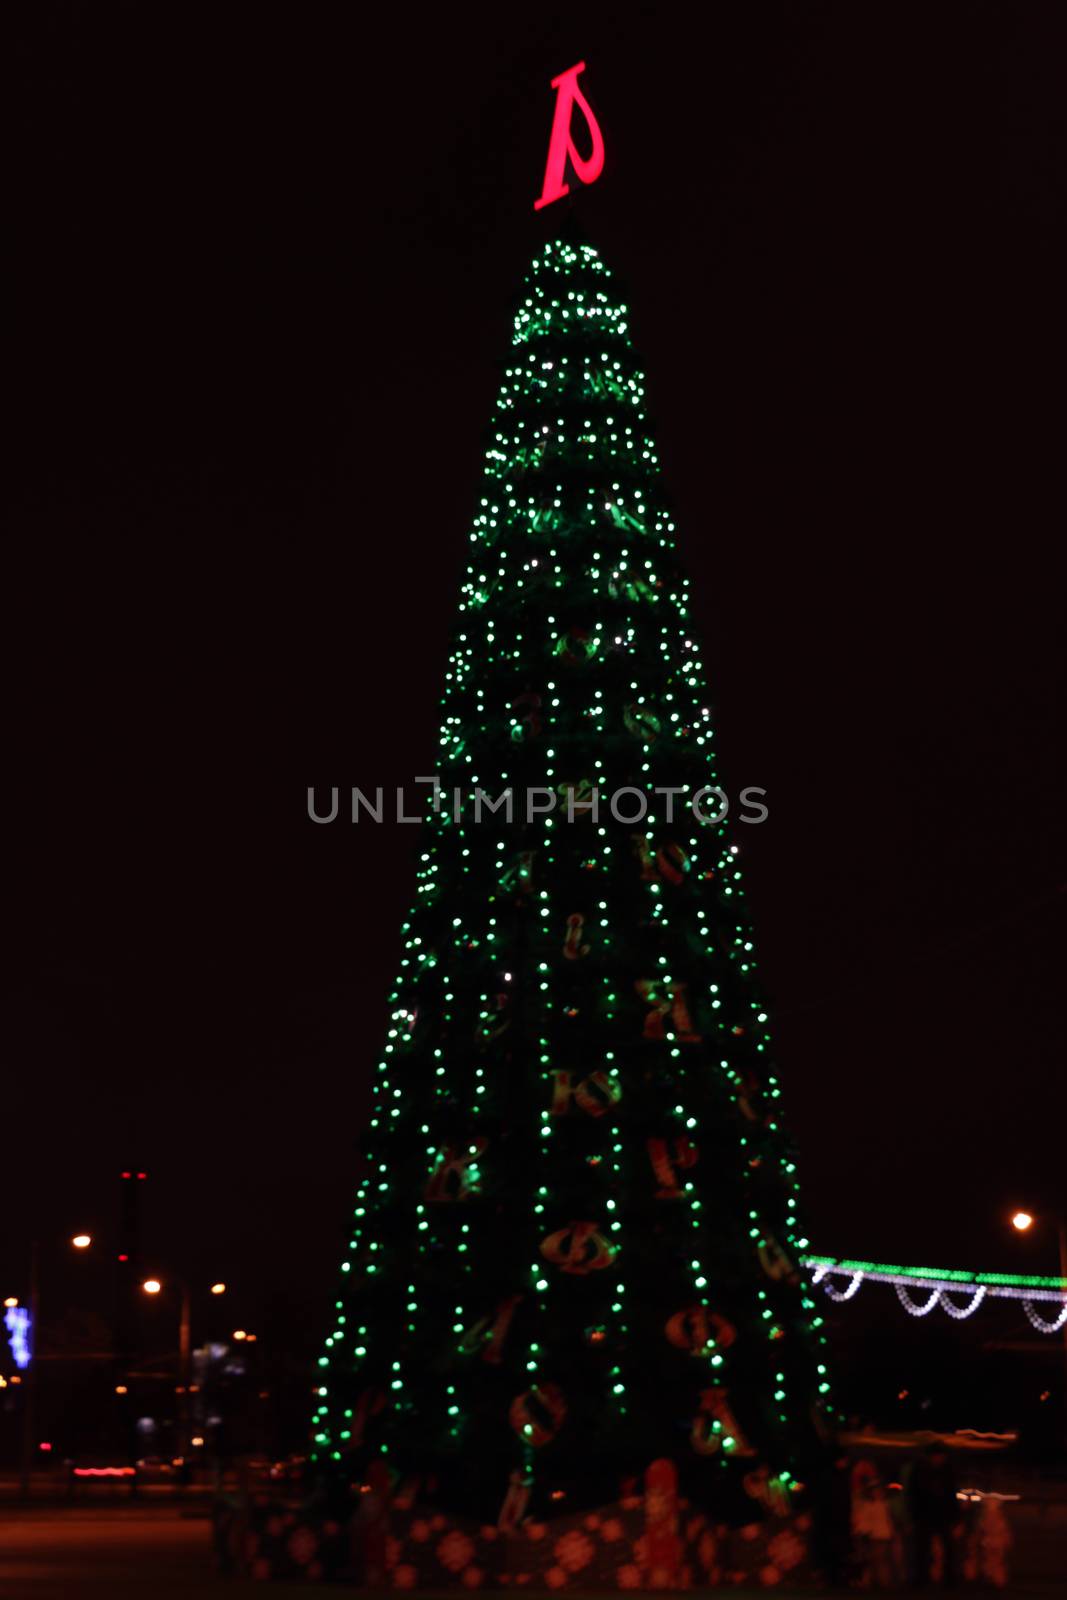 Snow Covered Christmas Tree with Multi Colored Lights at Night. by kip02kas